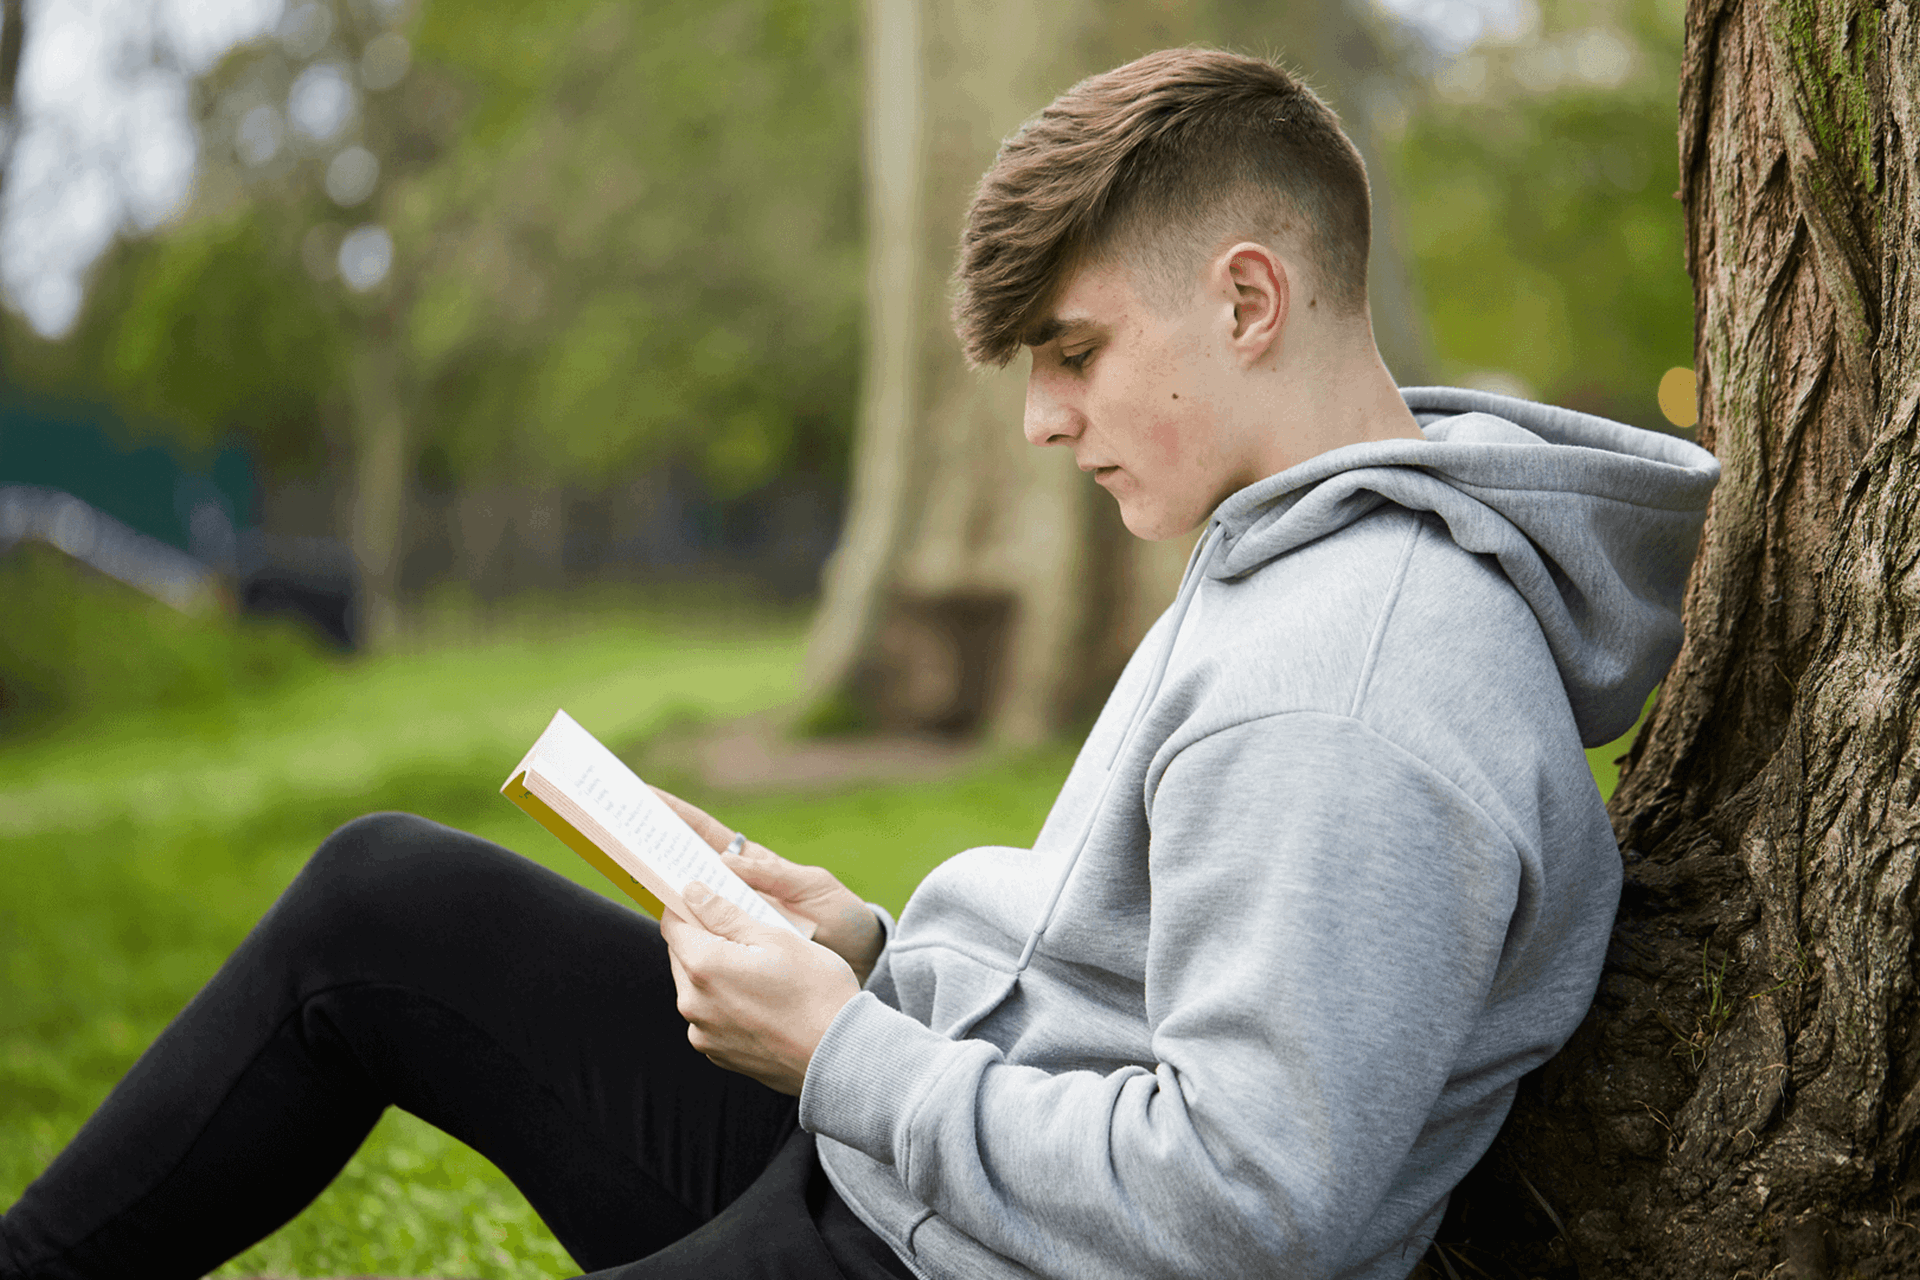 A young person sits against a tree in the park while reading a book.